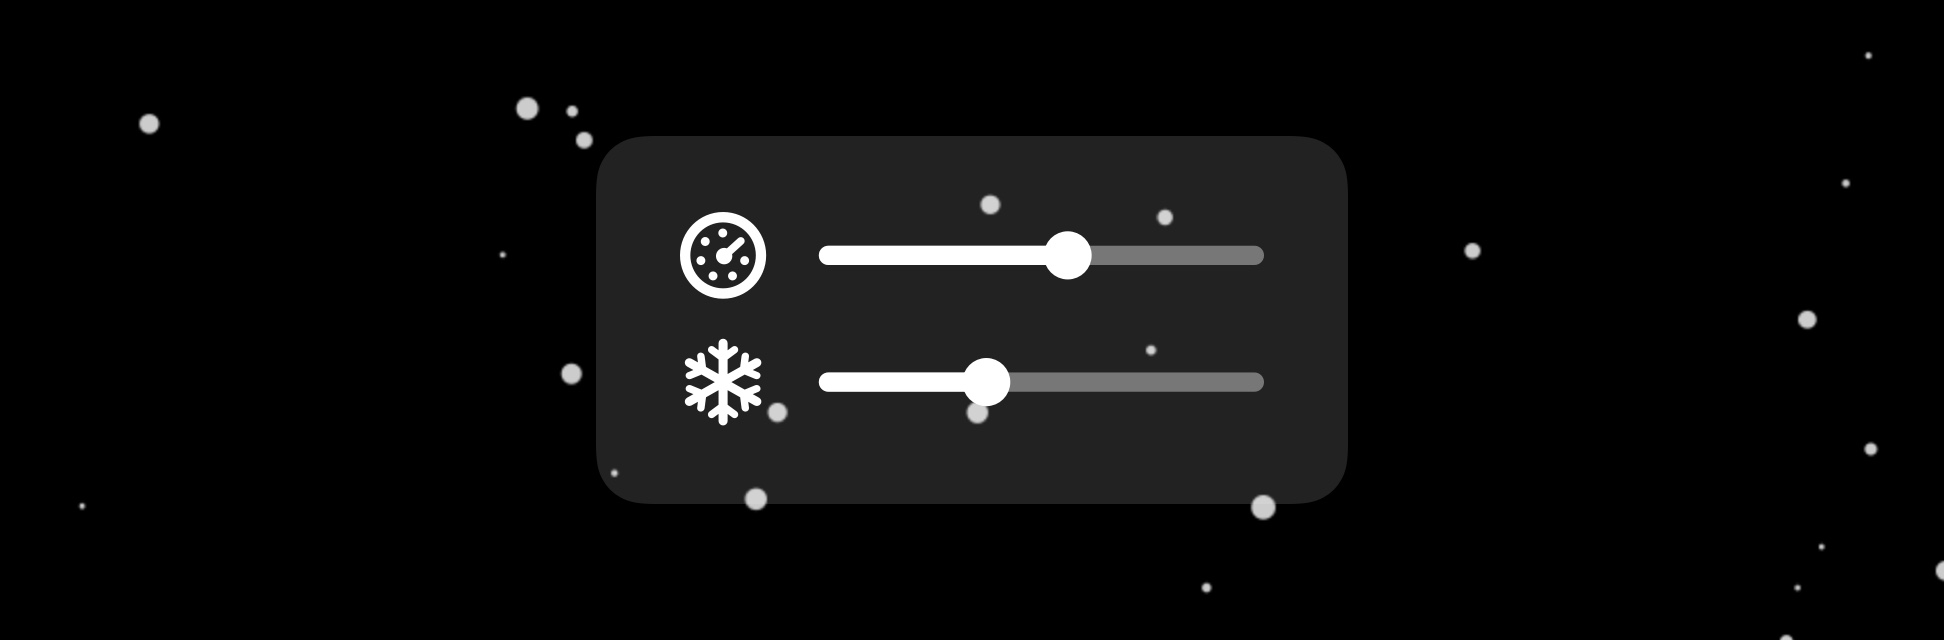 Snow simulation in browser, using HTML Canvas.